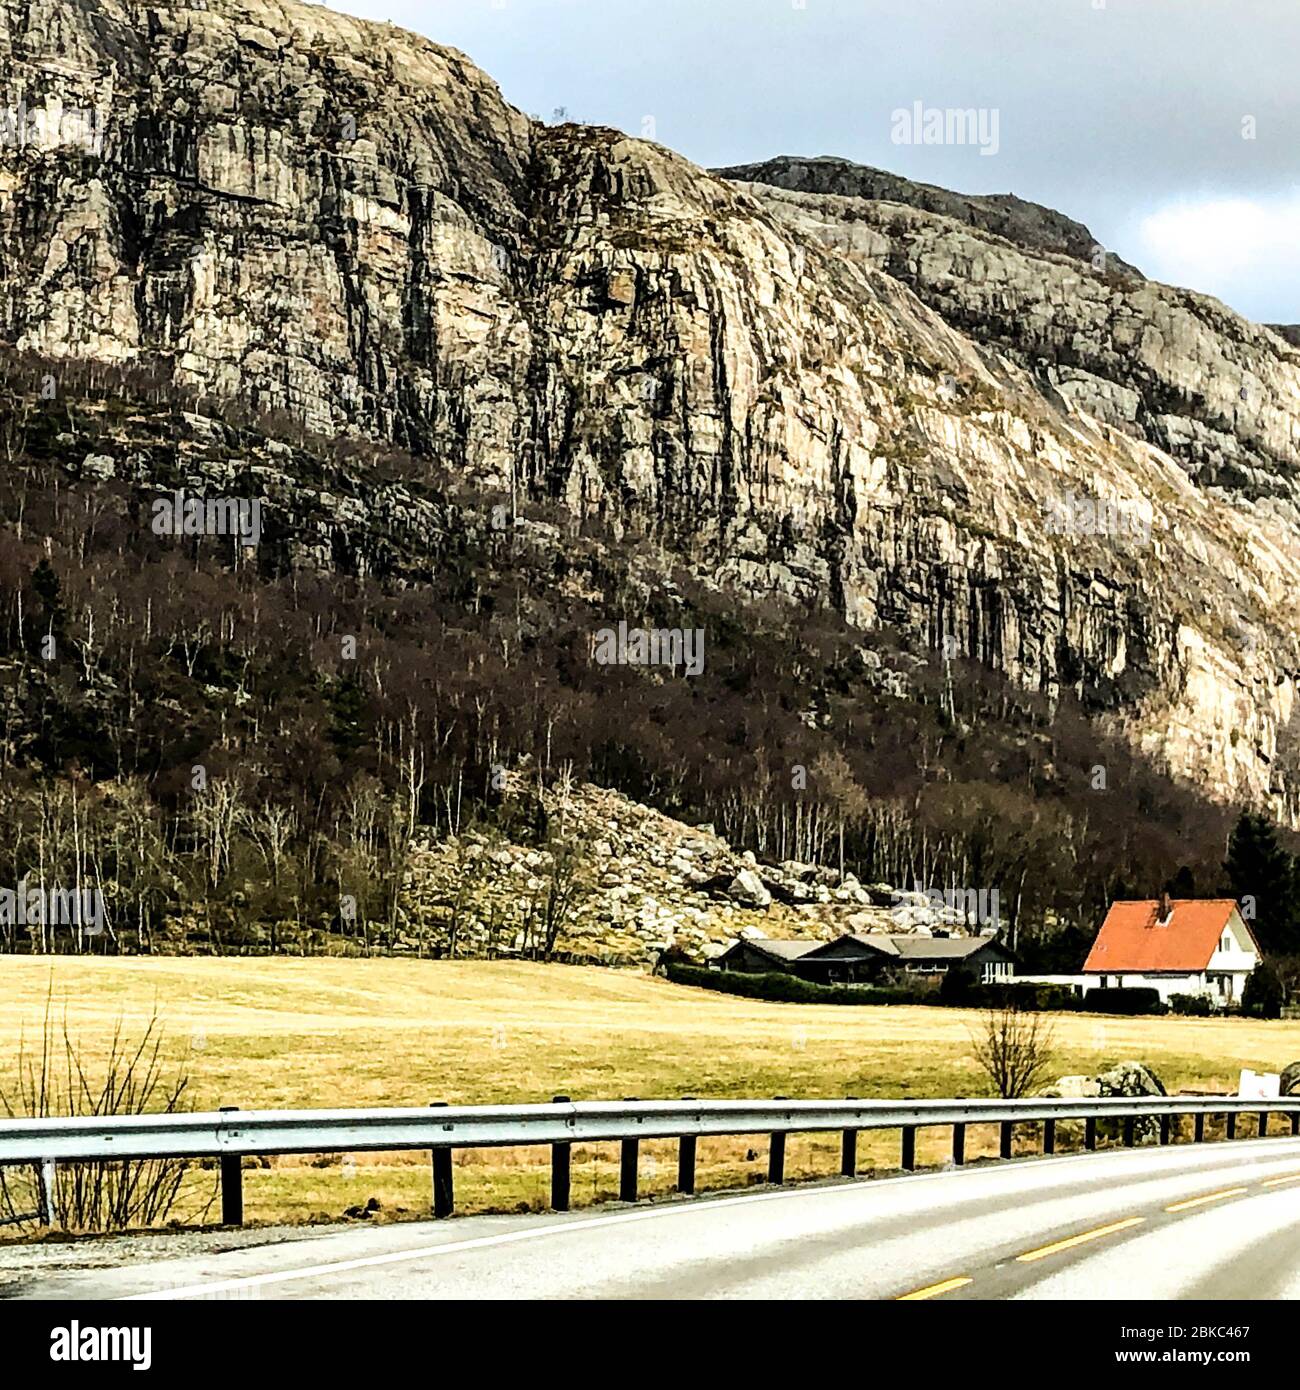 Typical Beautiful Harsh, Rugged Mountainous Landscape Of Southwest Norway In Scandinavia Stock Photo